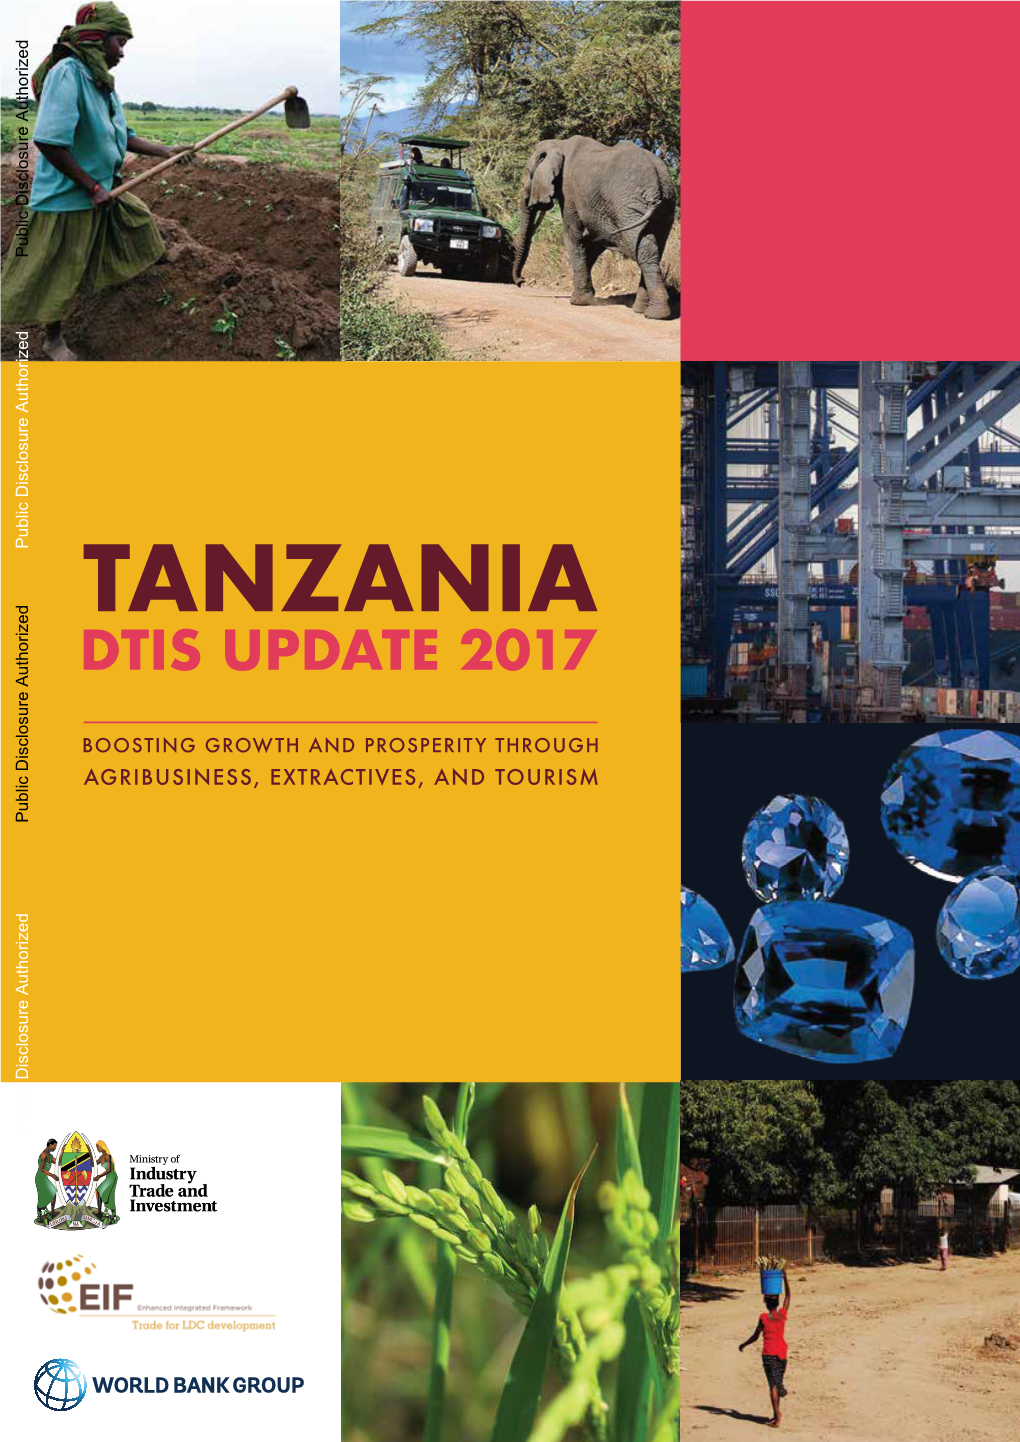 (DTIS) for Tanzania Is Therefore a Timely Input to These Important New Initiatives